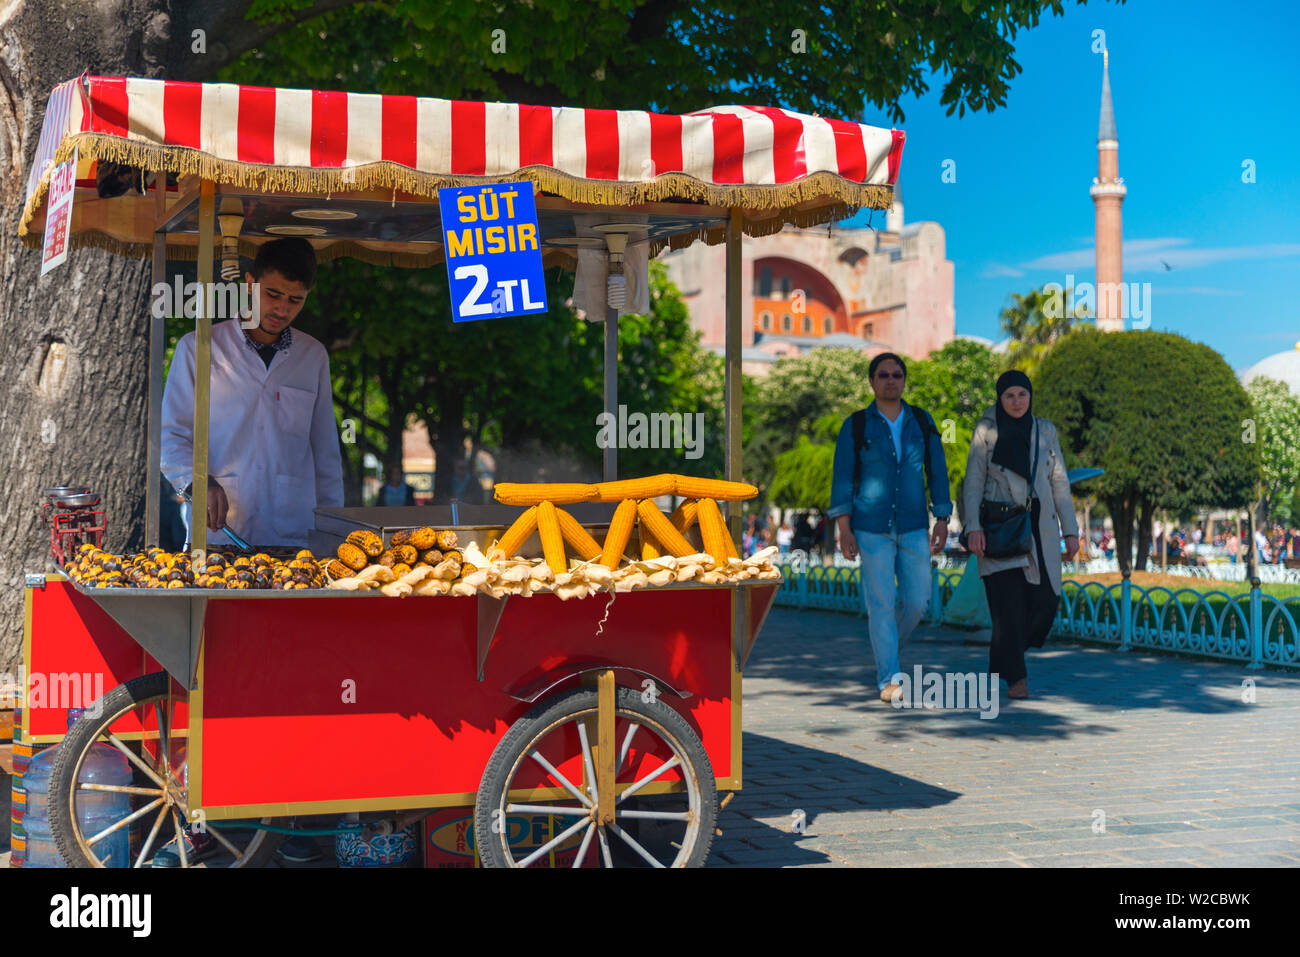 Turkey, Istanbul, Sultanahmet, Cafe and Hagia Sophia (or Ayasofya),  Greek Orthodox basilica, imperial mosque, and now a museum, stall selling snacks of chestnuts and sweetcorn (maise) Stock Photo